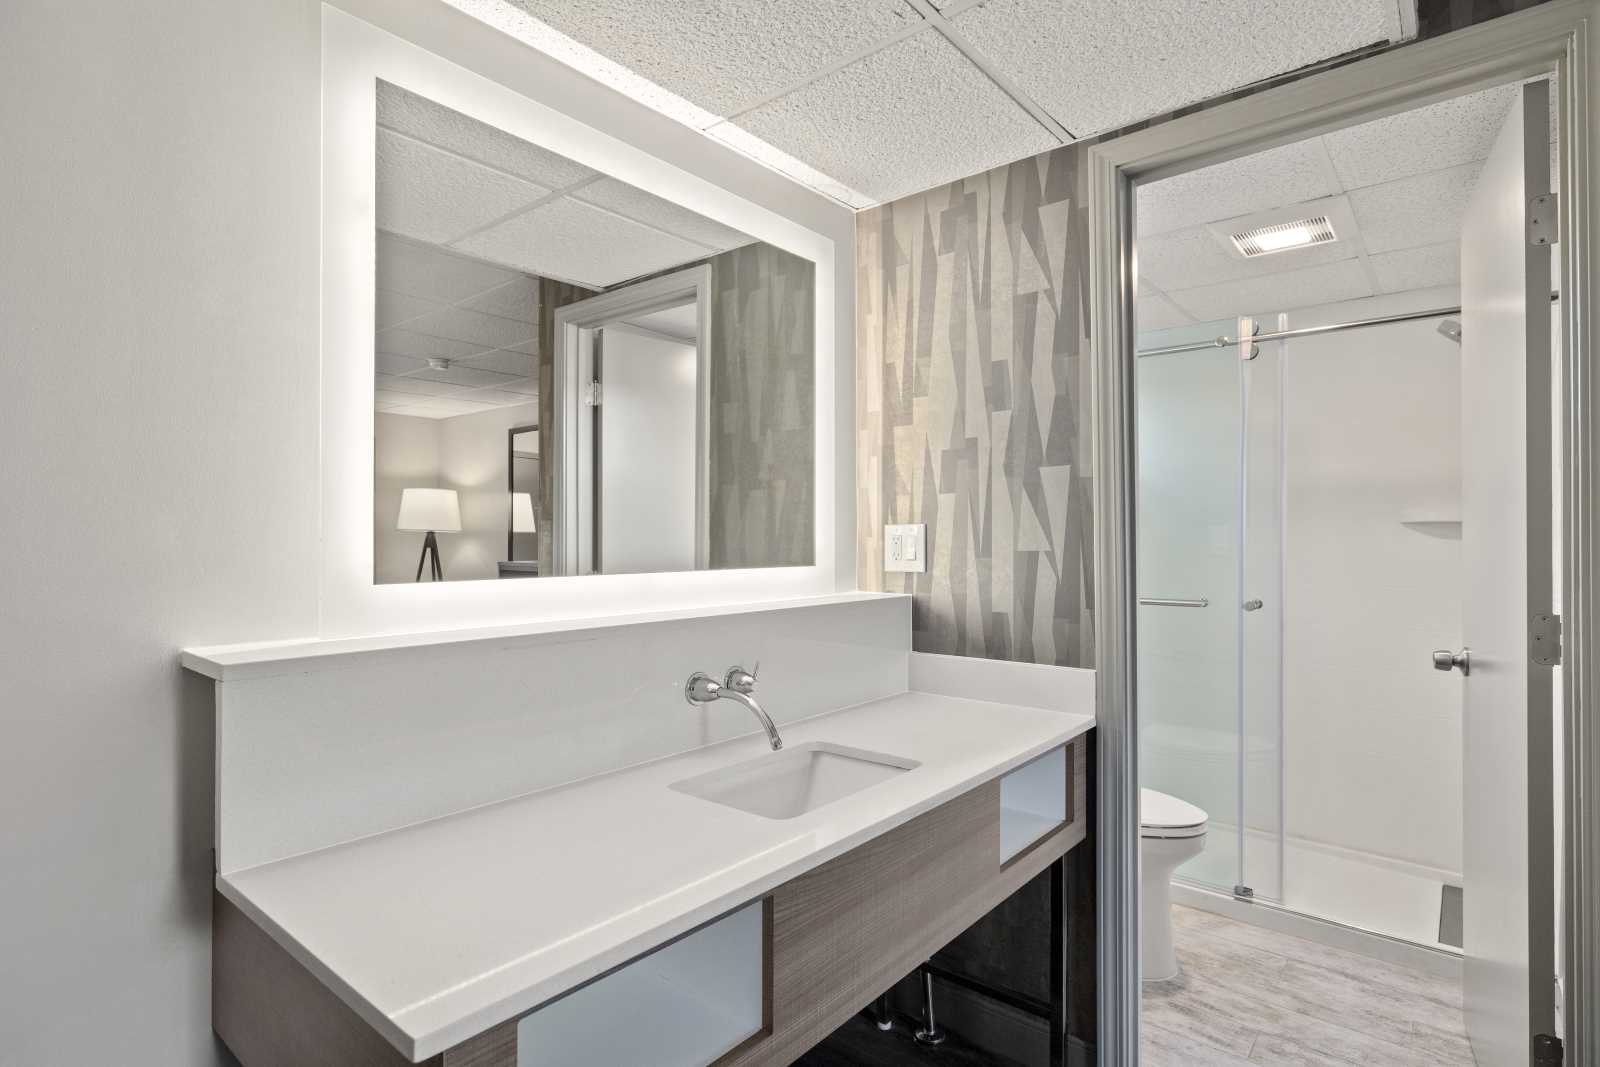 Sparkling Clean Accommodations Designed with your comfort & convenience in mind